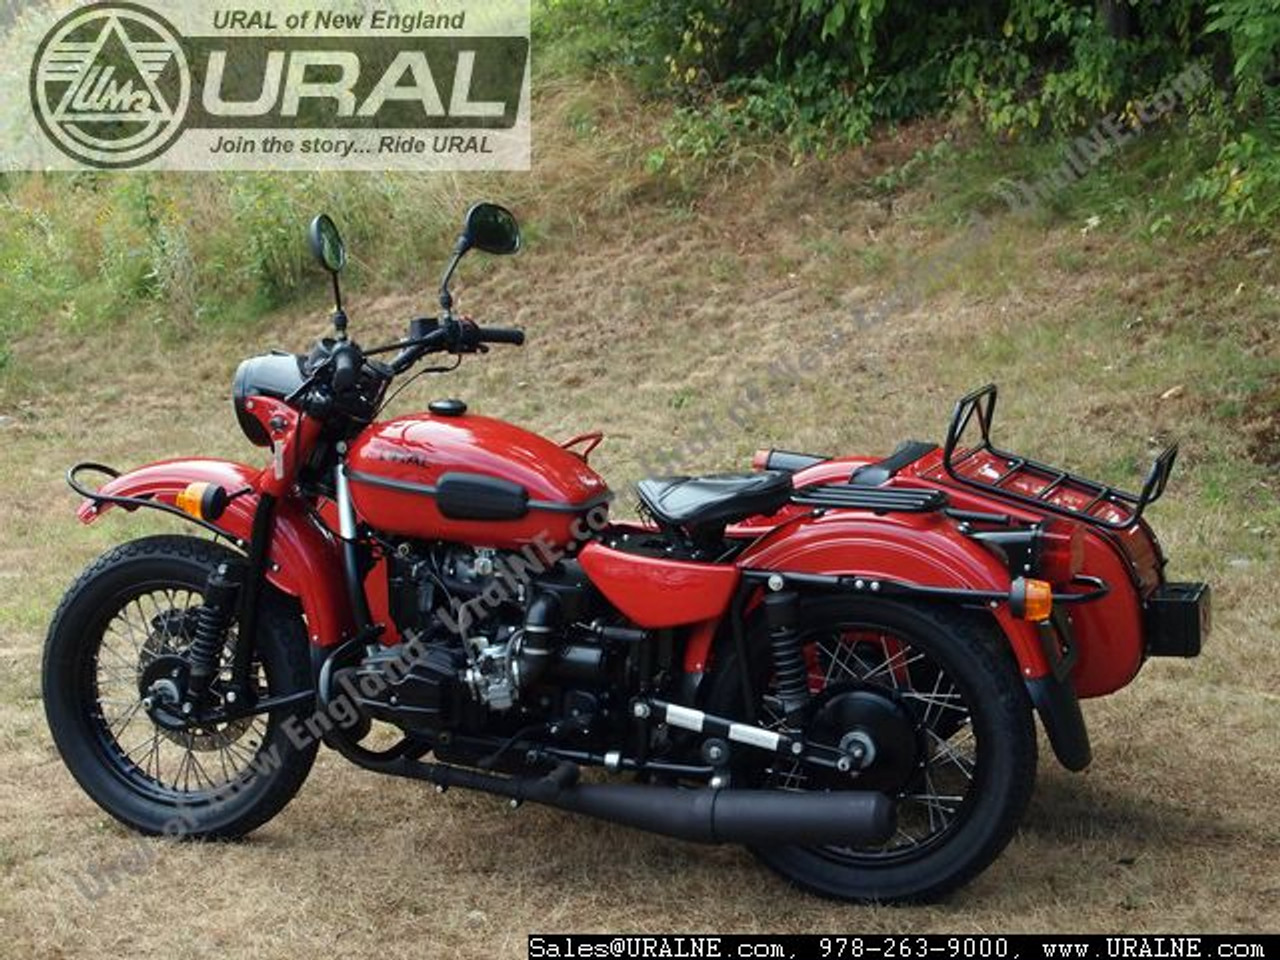 2010 Ural "Red October" Limited Edition (One of the 26 Bikes)